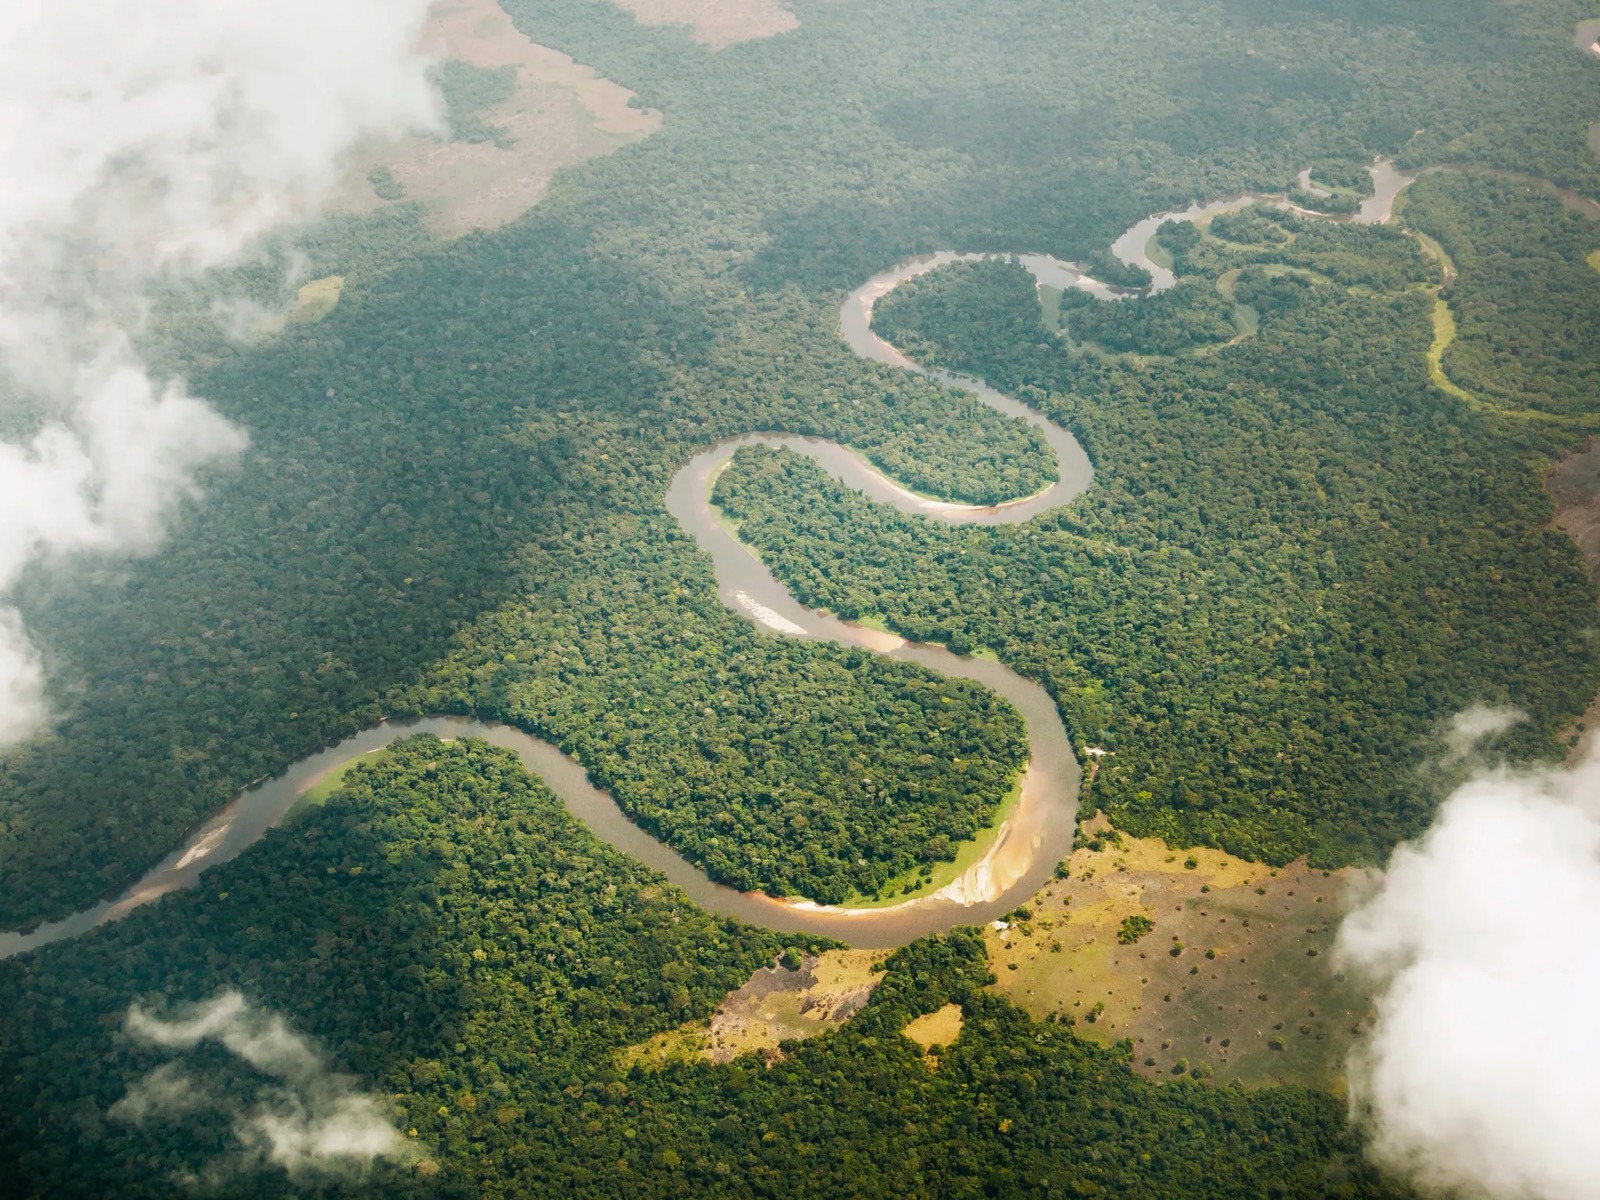 Do You Have the Smarts to Pass This World Geography Quiz With Flying Colors 🌈? Congo River